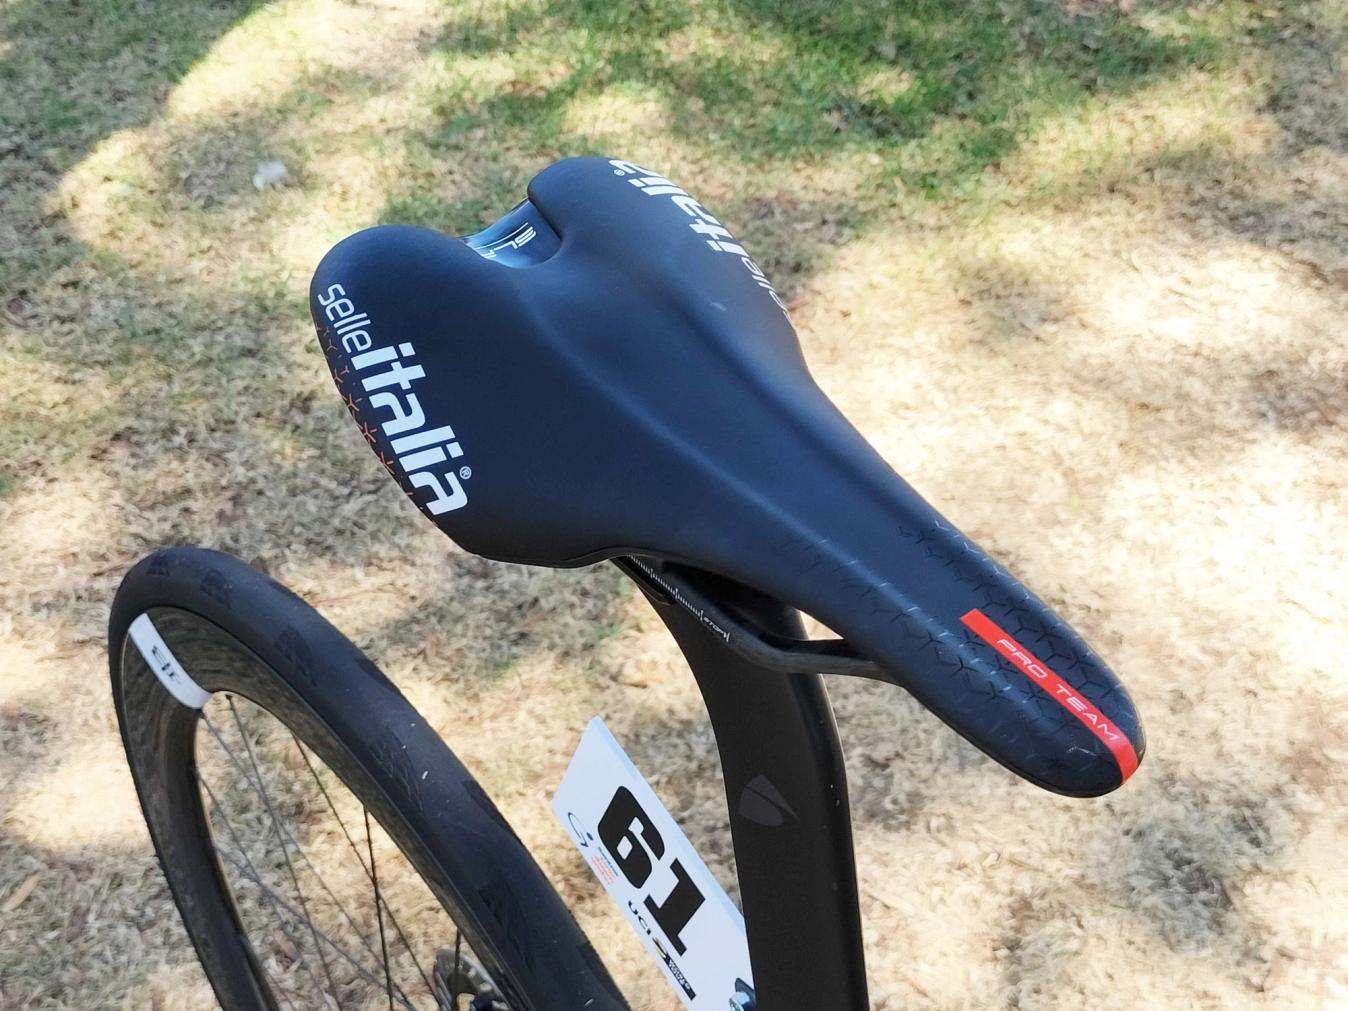 The Selle Italia SLR Boost was George Bennett's saddle of choice